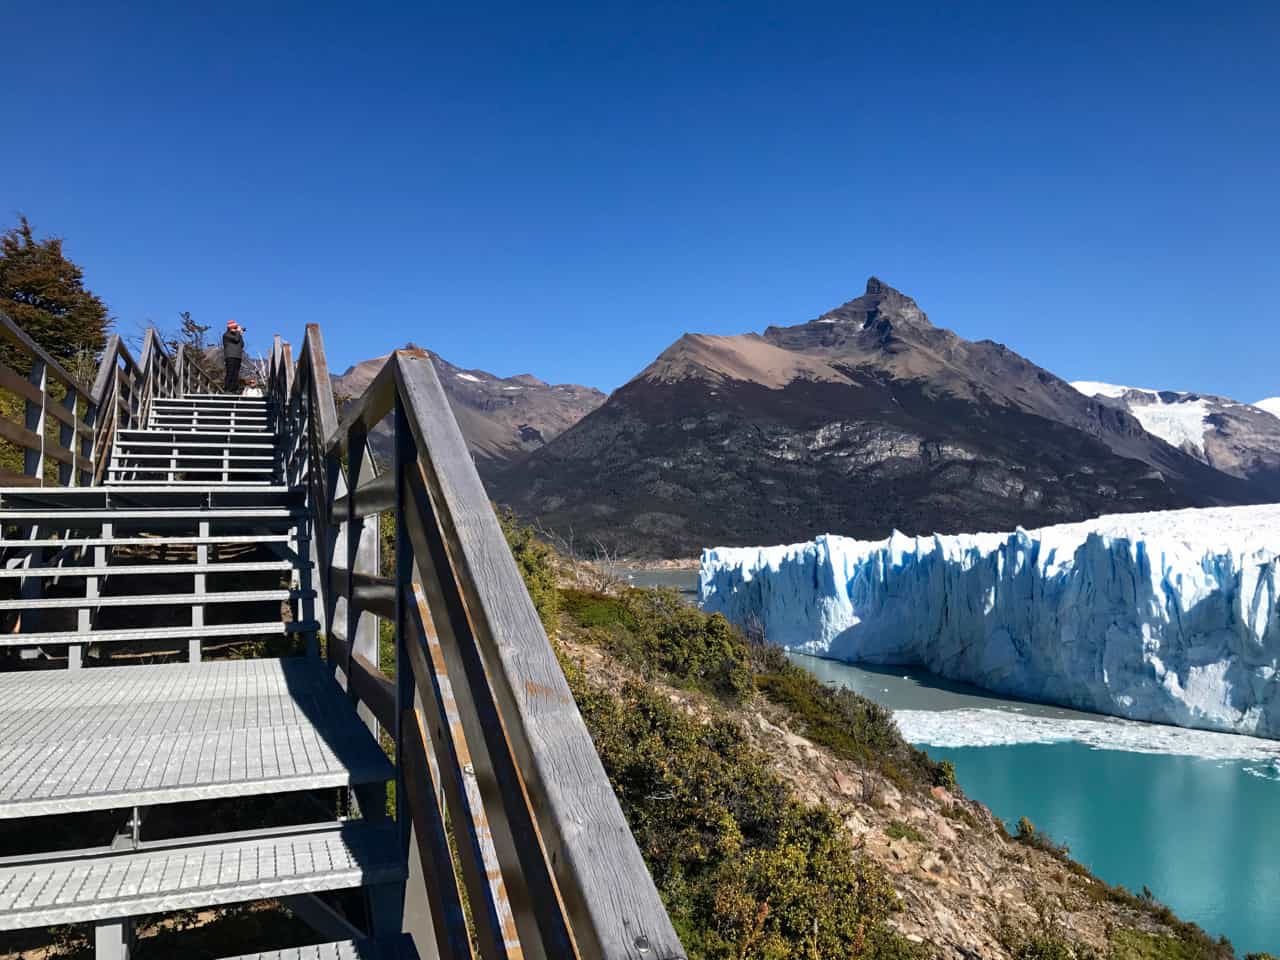 A guy photographs the Perito Moreno Glacier from one of the park's walkway.